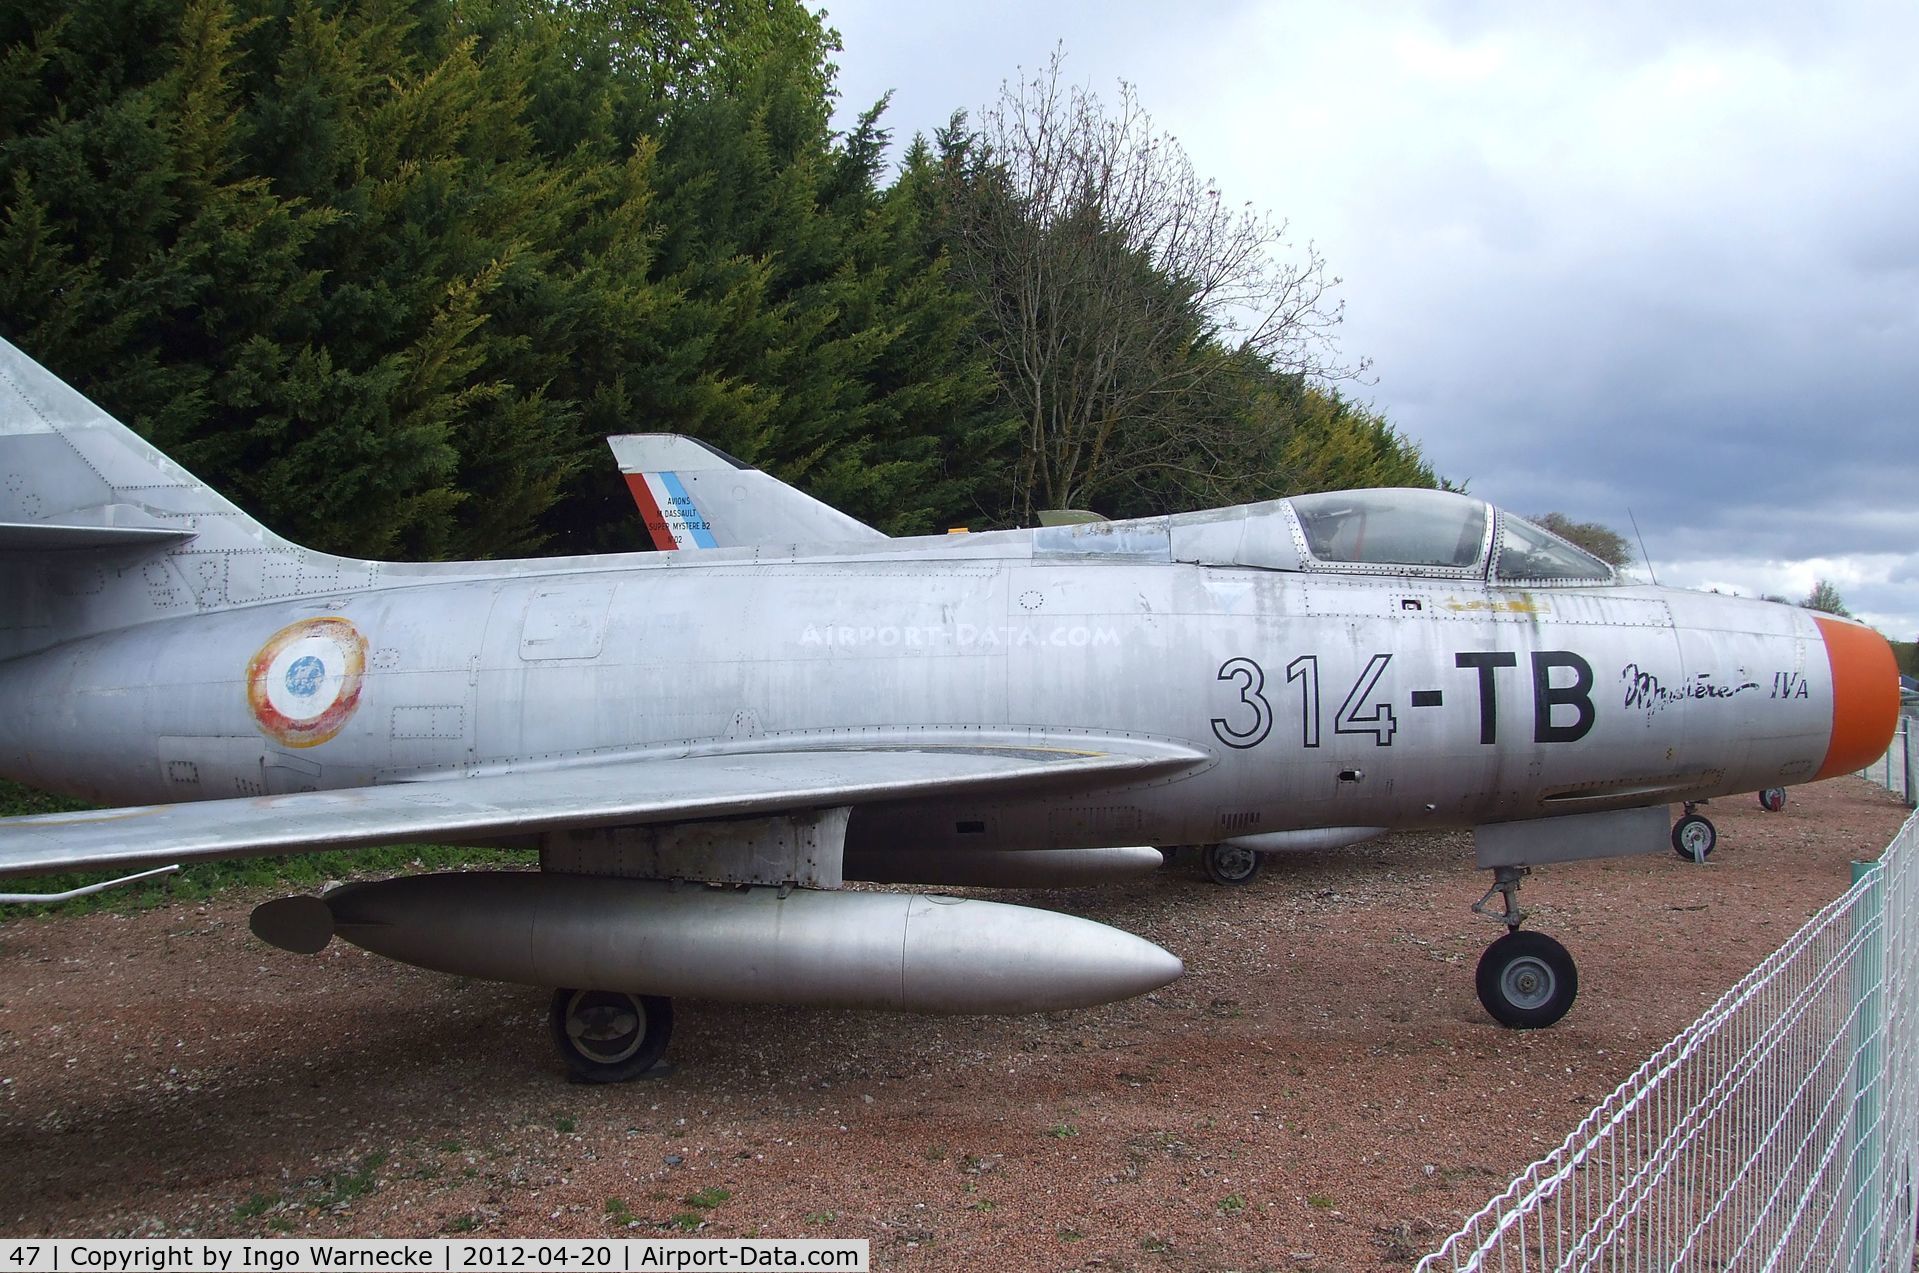 47, Dassault Mystere IVA C/N 47, Dassault Mystere IV A at the Musee de l'Aviation du Chateau, Savigny-les-Beaune